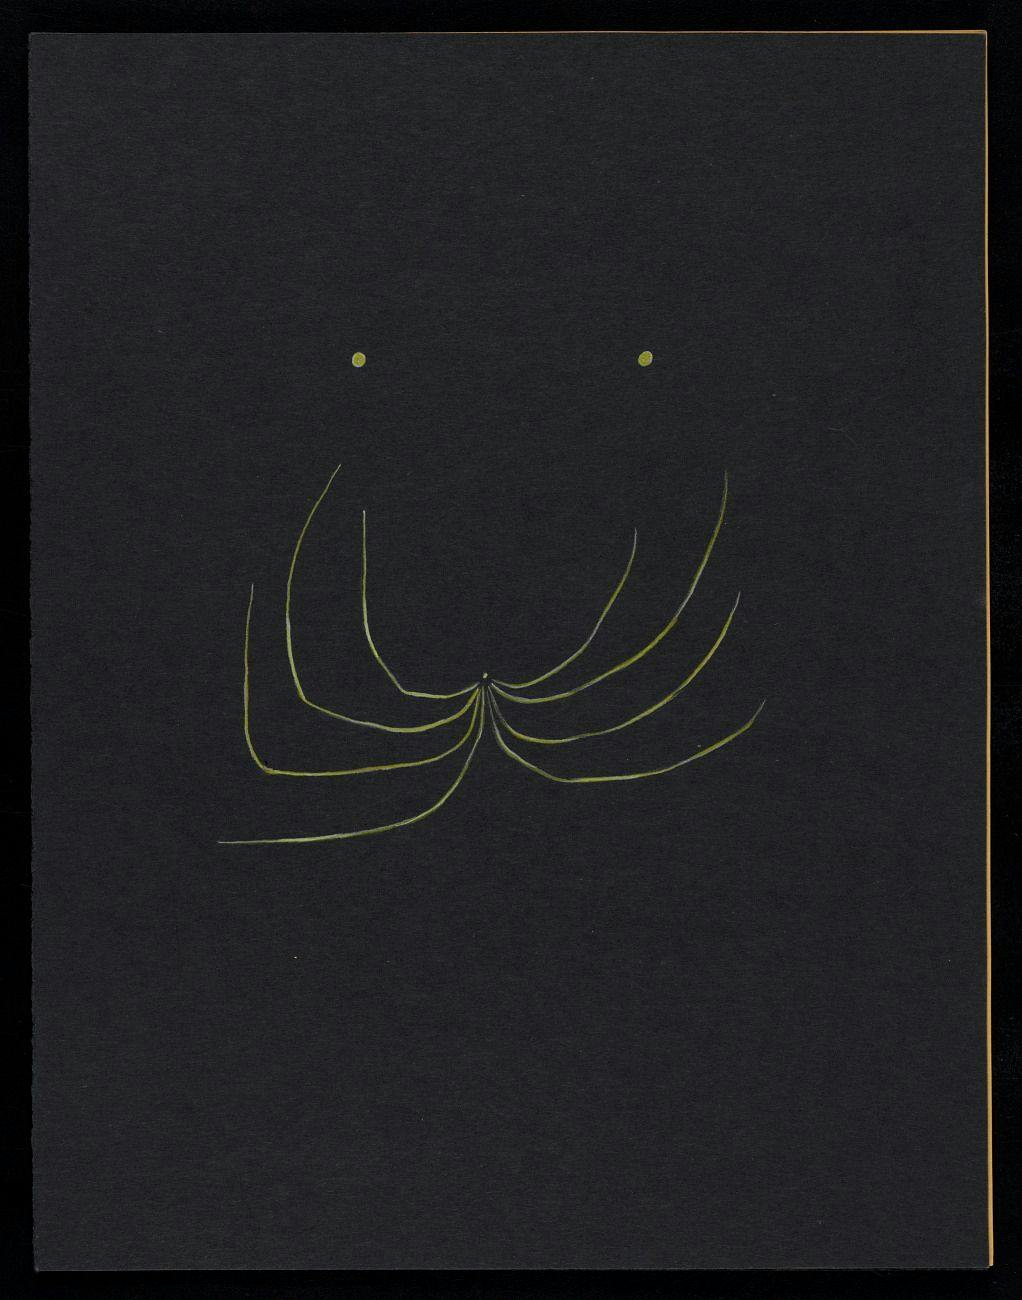 From Emily Hall Tremaine's artist file for Joan Miró